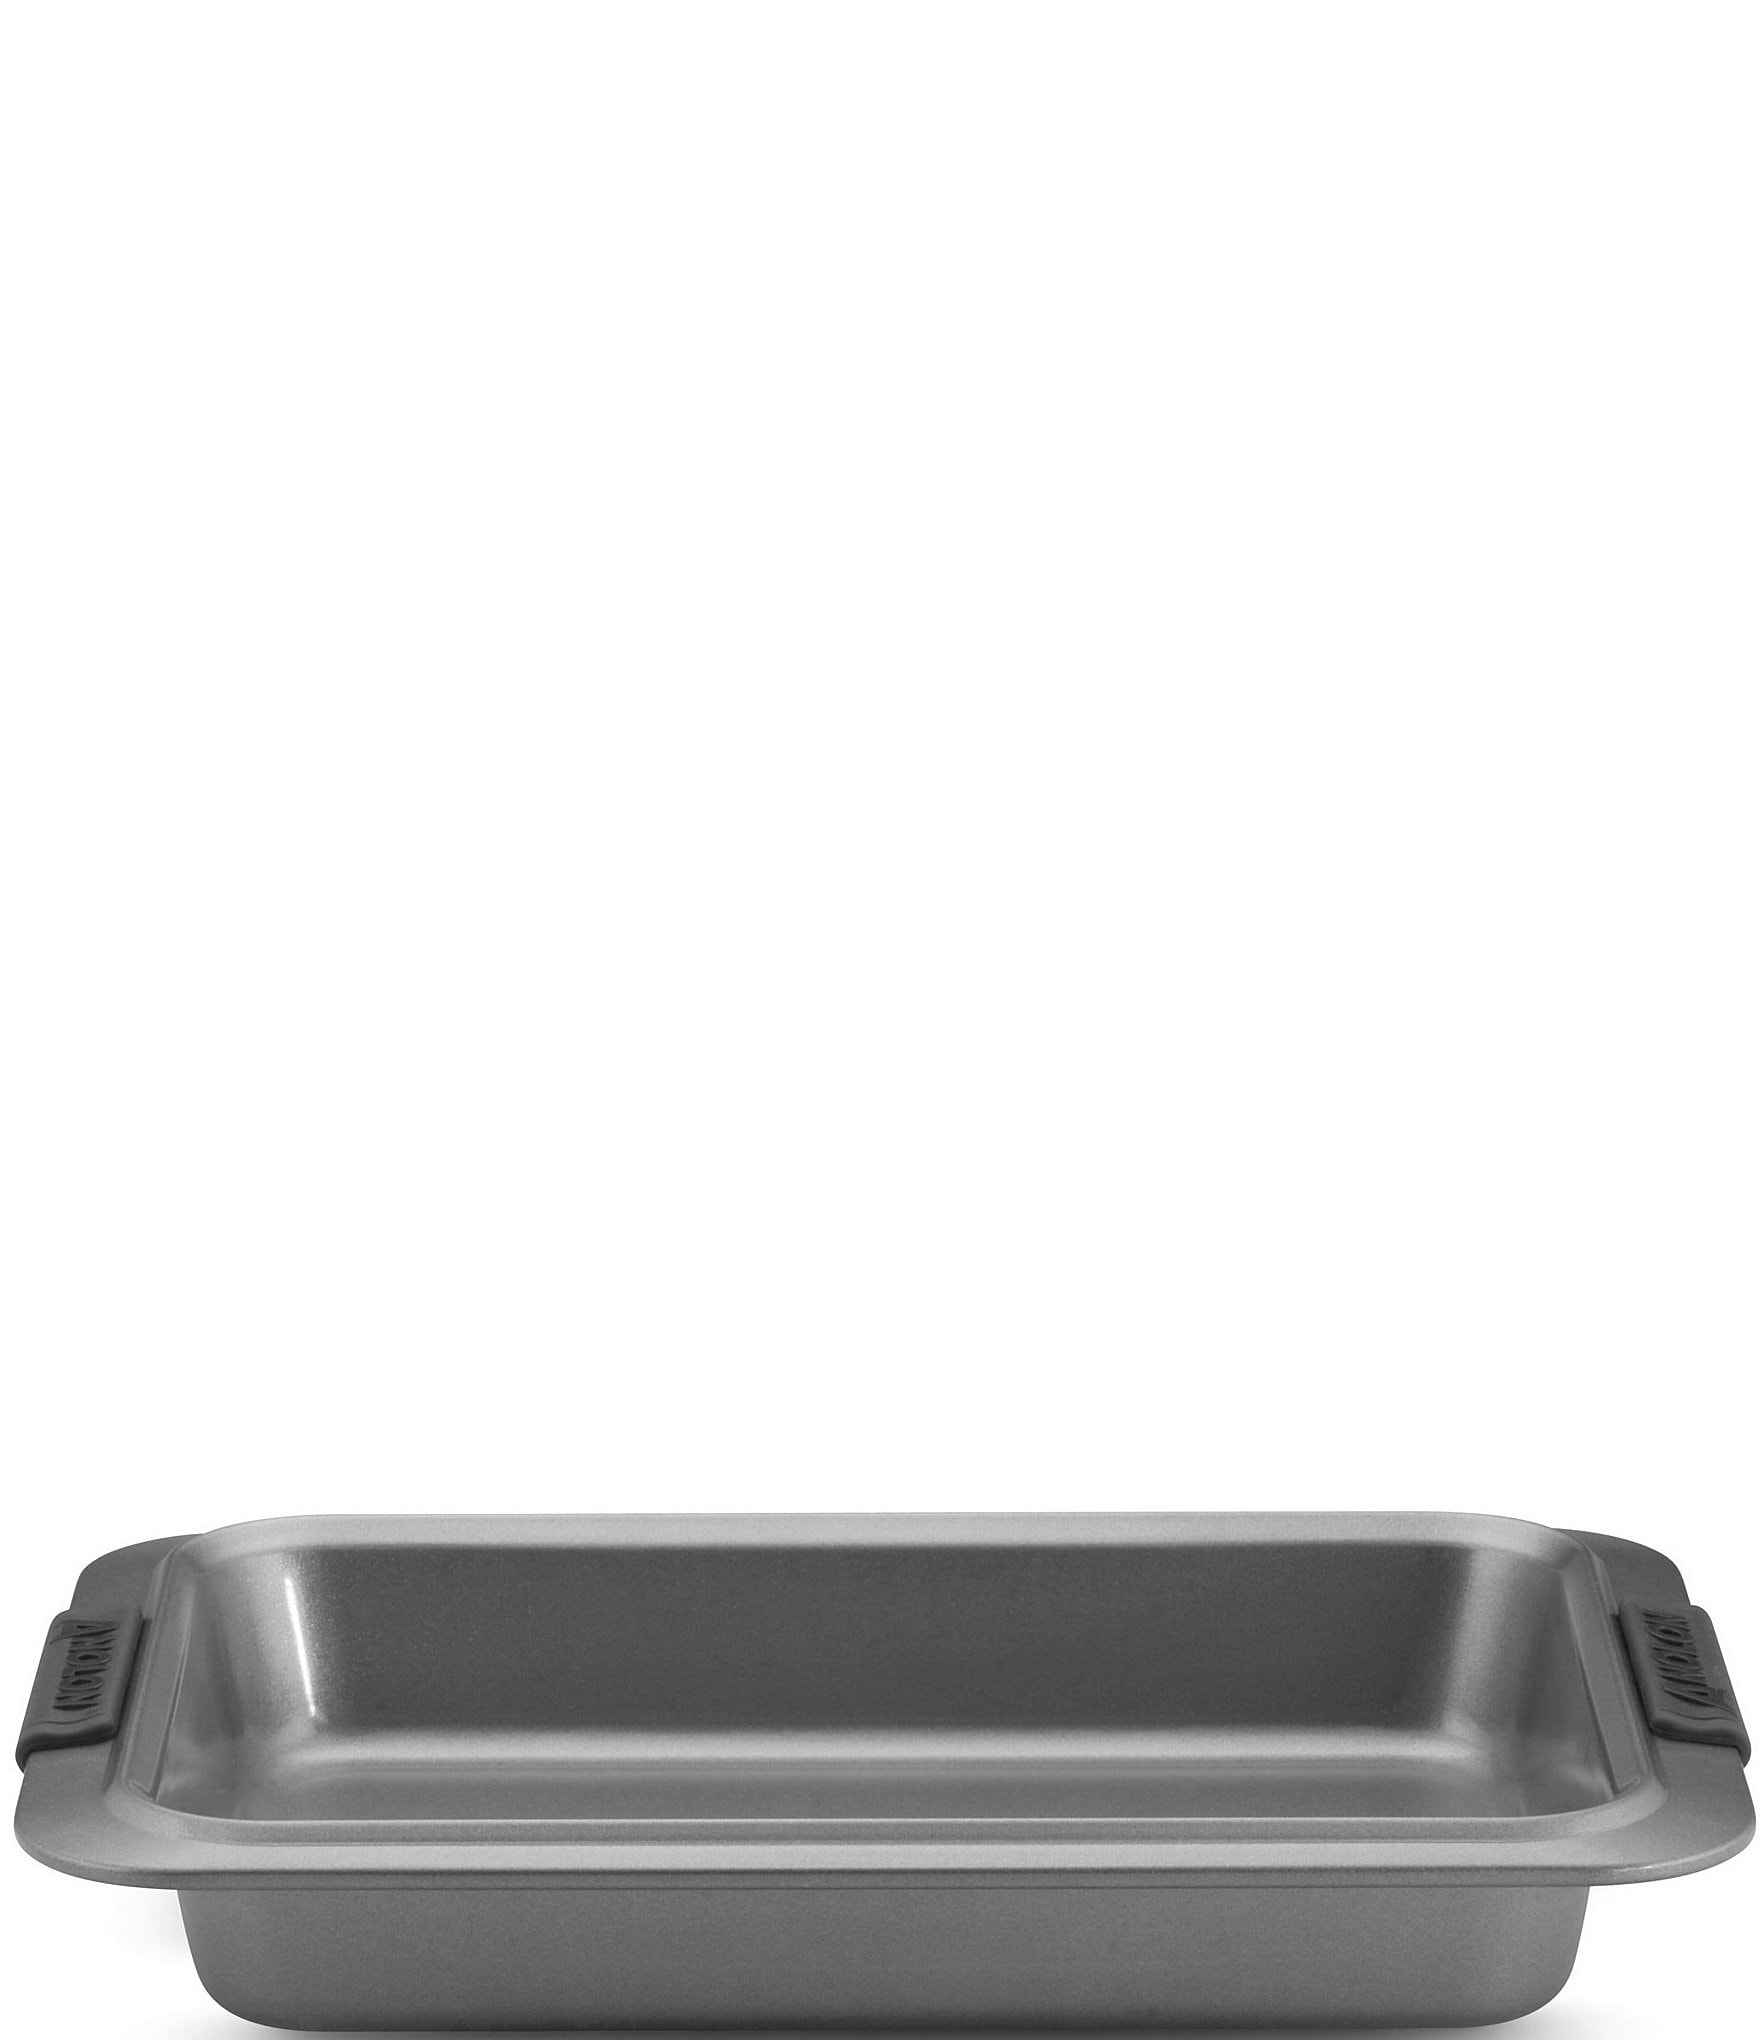 Anolon Advanced Bakeware Nonstick Cake Pan with Lid and Silicone